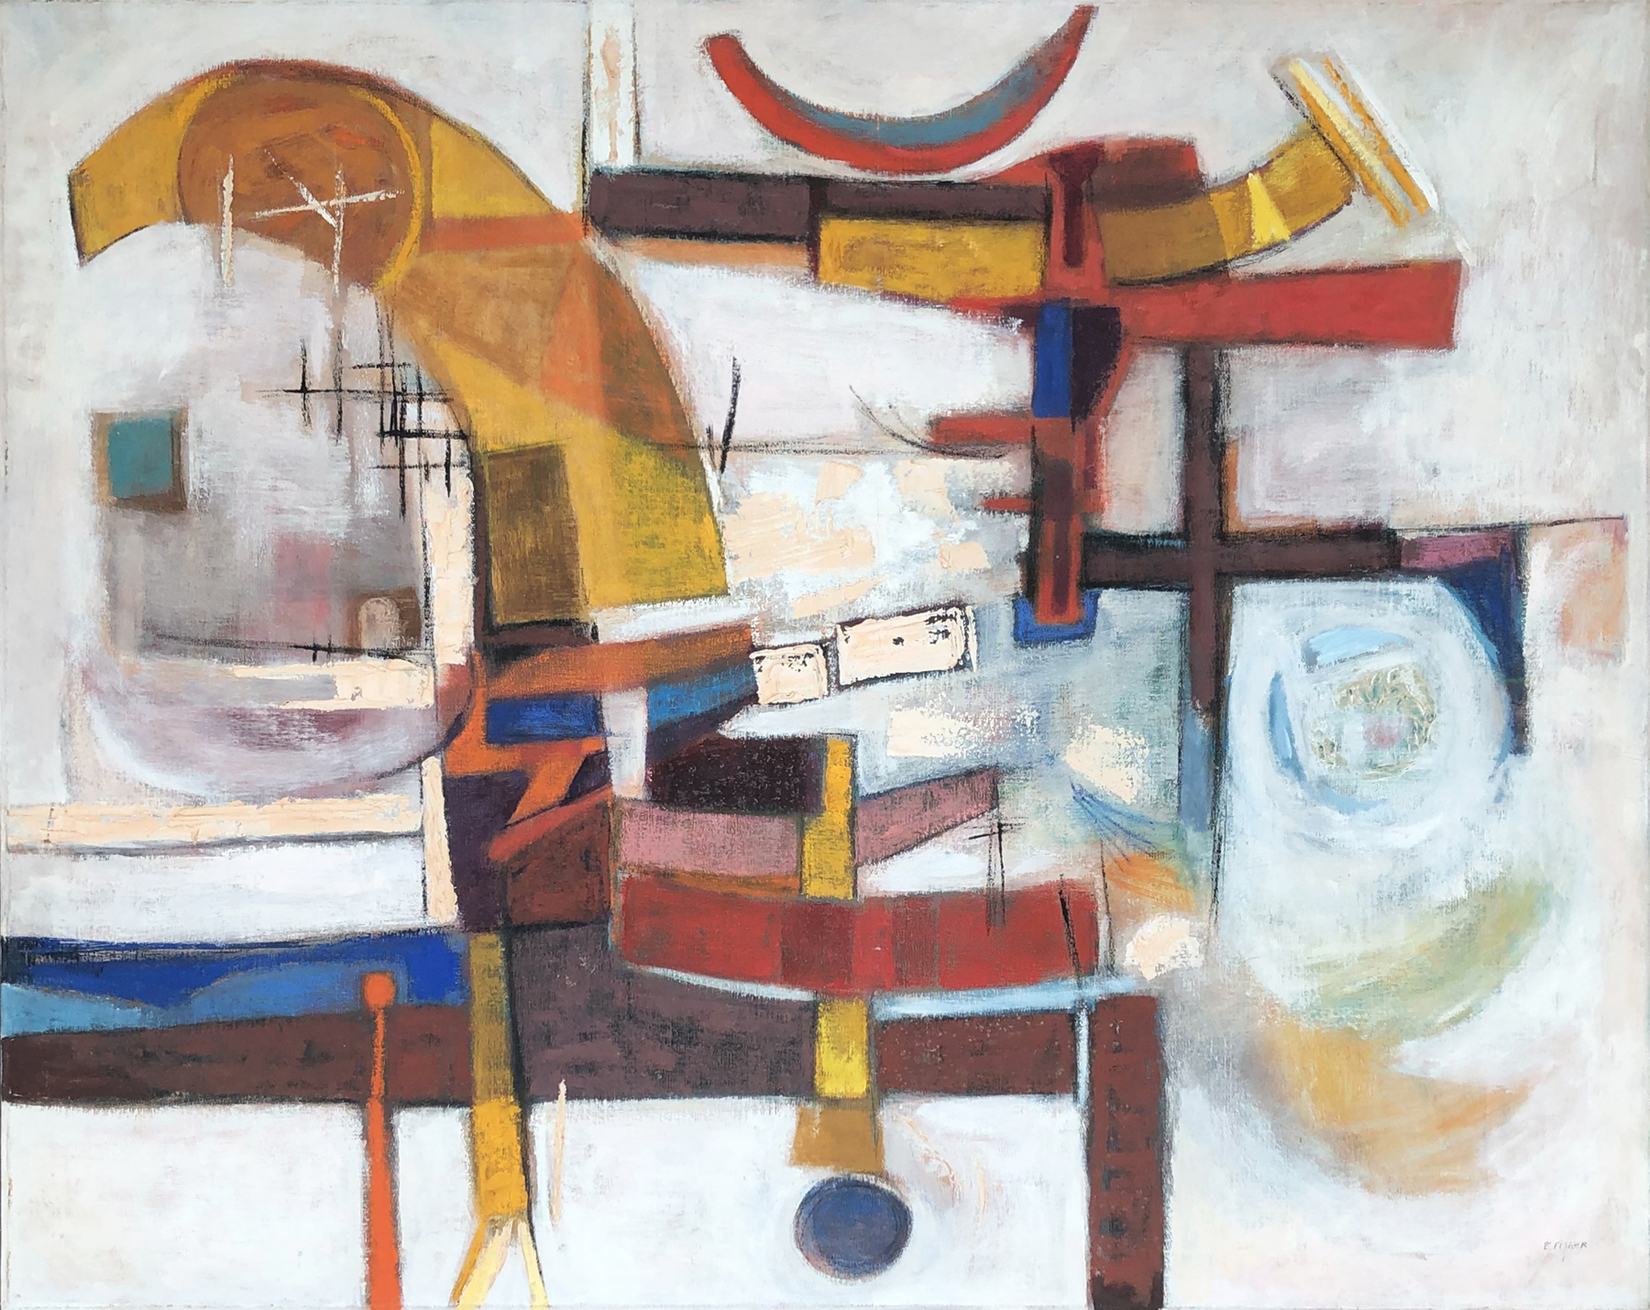 Oriental #1: Abstract Painting by Ethel Fisher, 1957, oil on canvas, 38 x 48 inches, mid-twentieth century abstract painting.